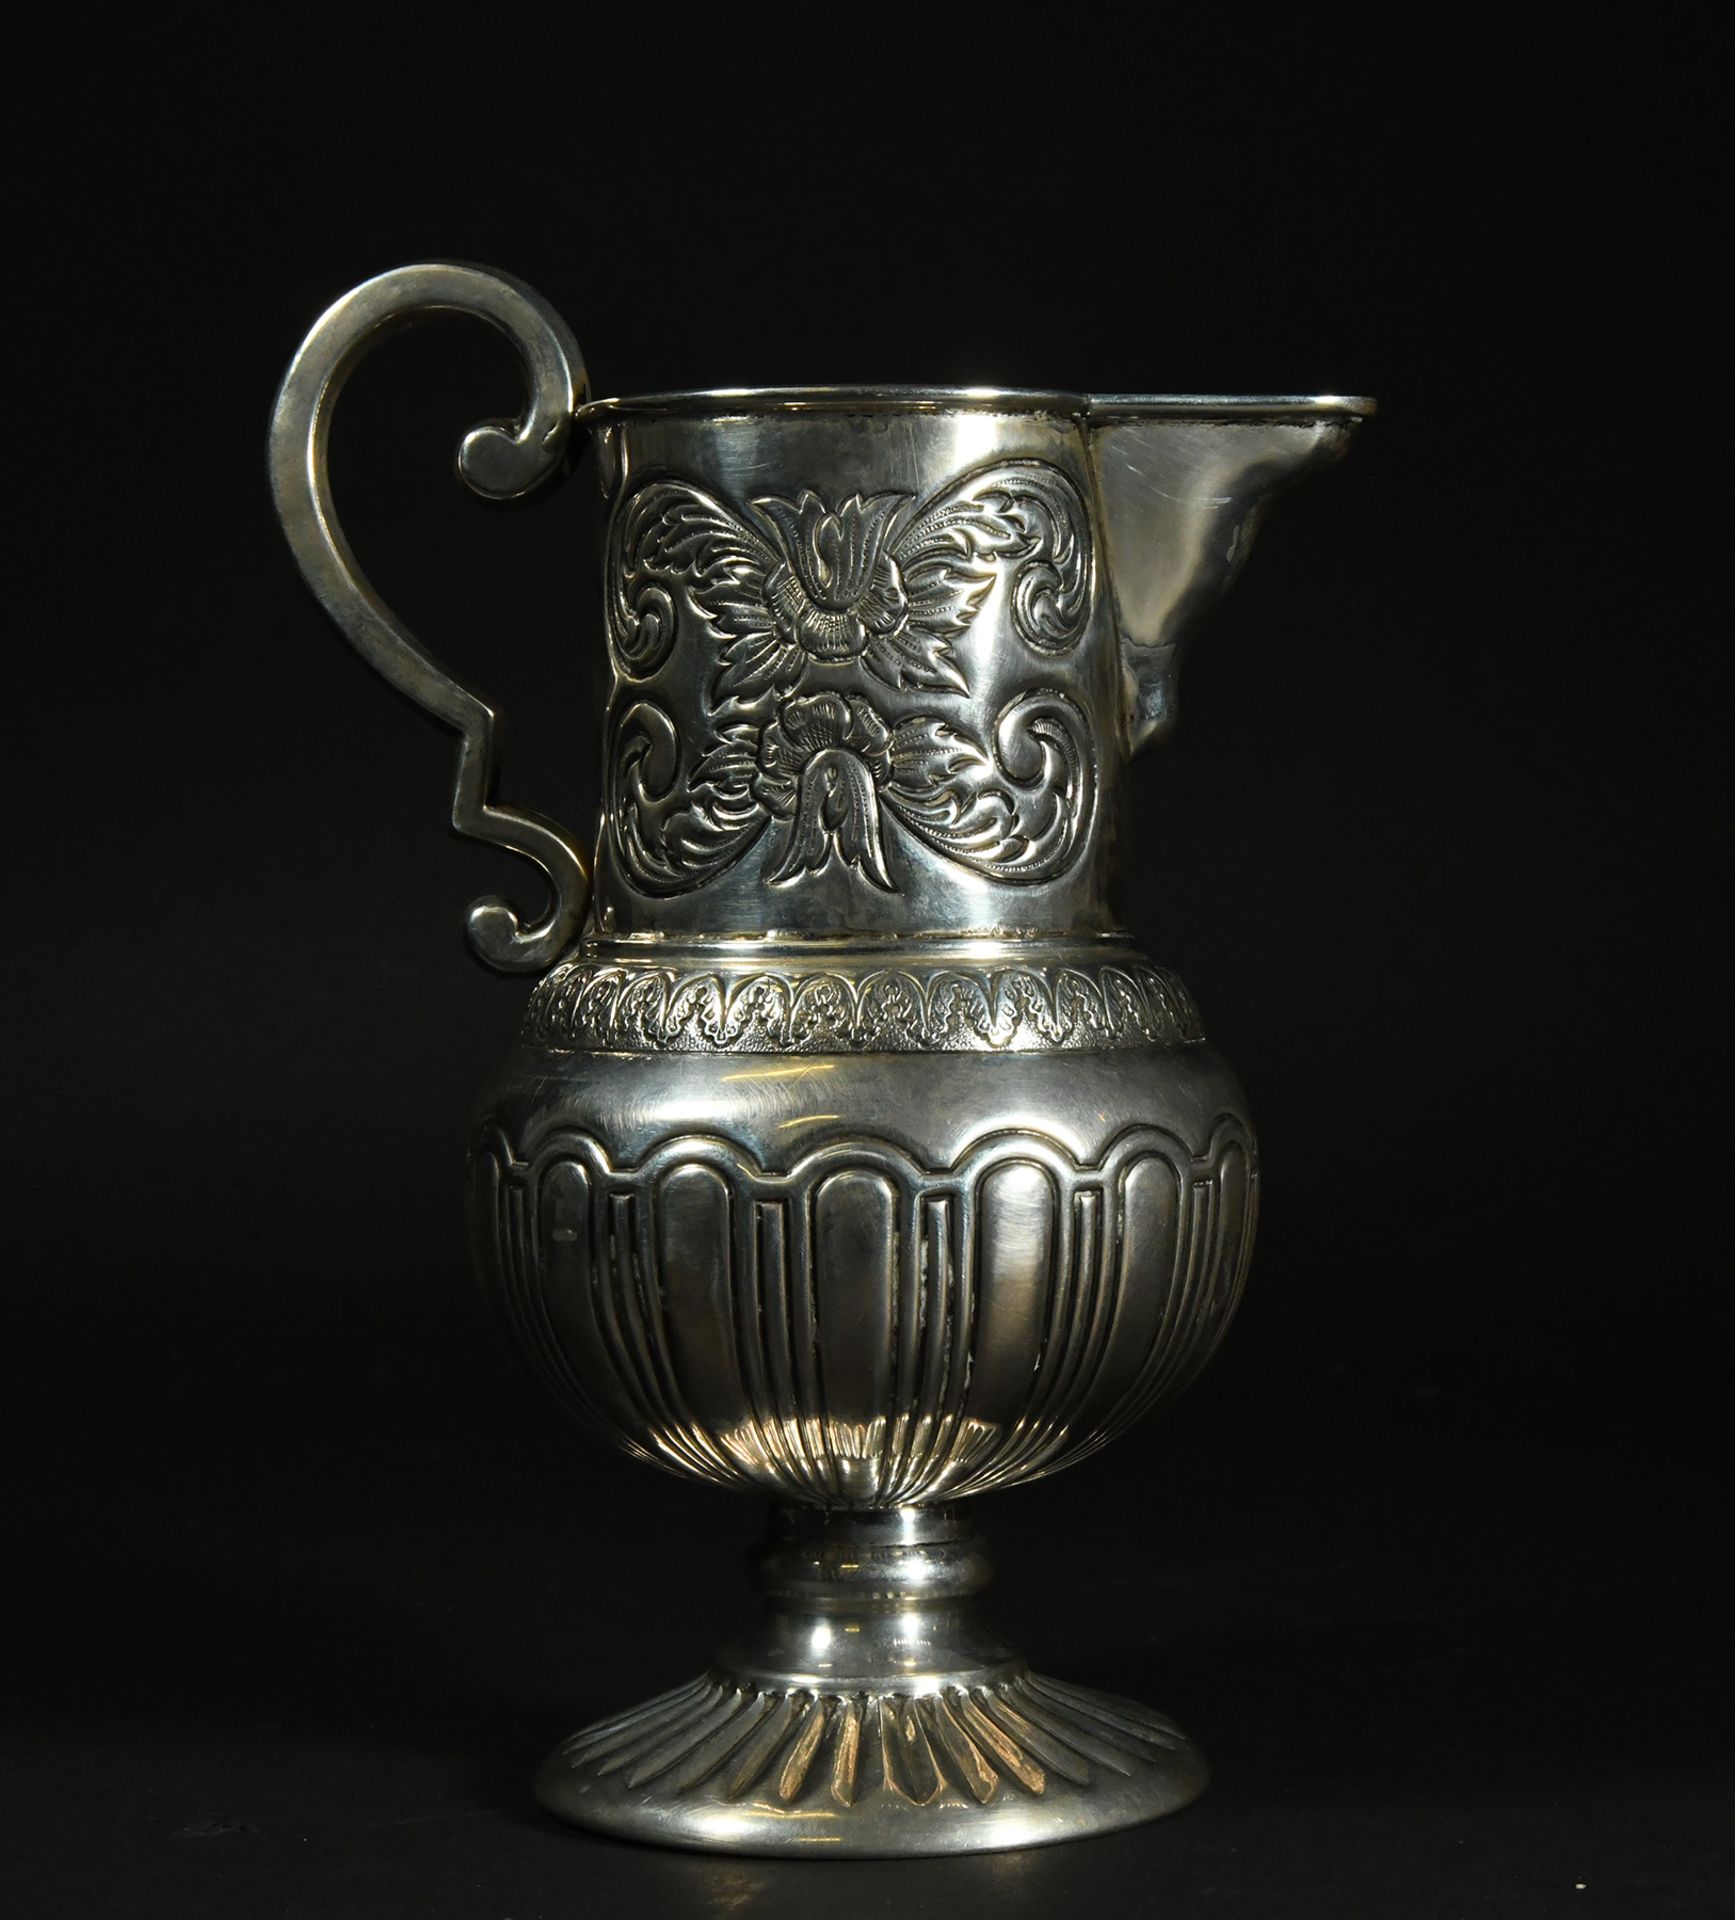 Spanish solid silver jug from the 18th century